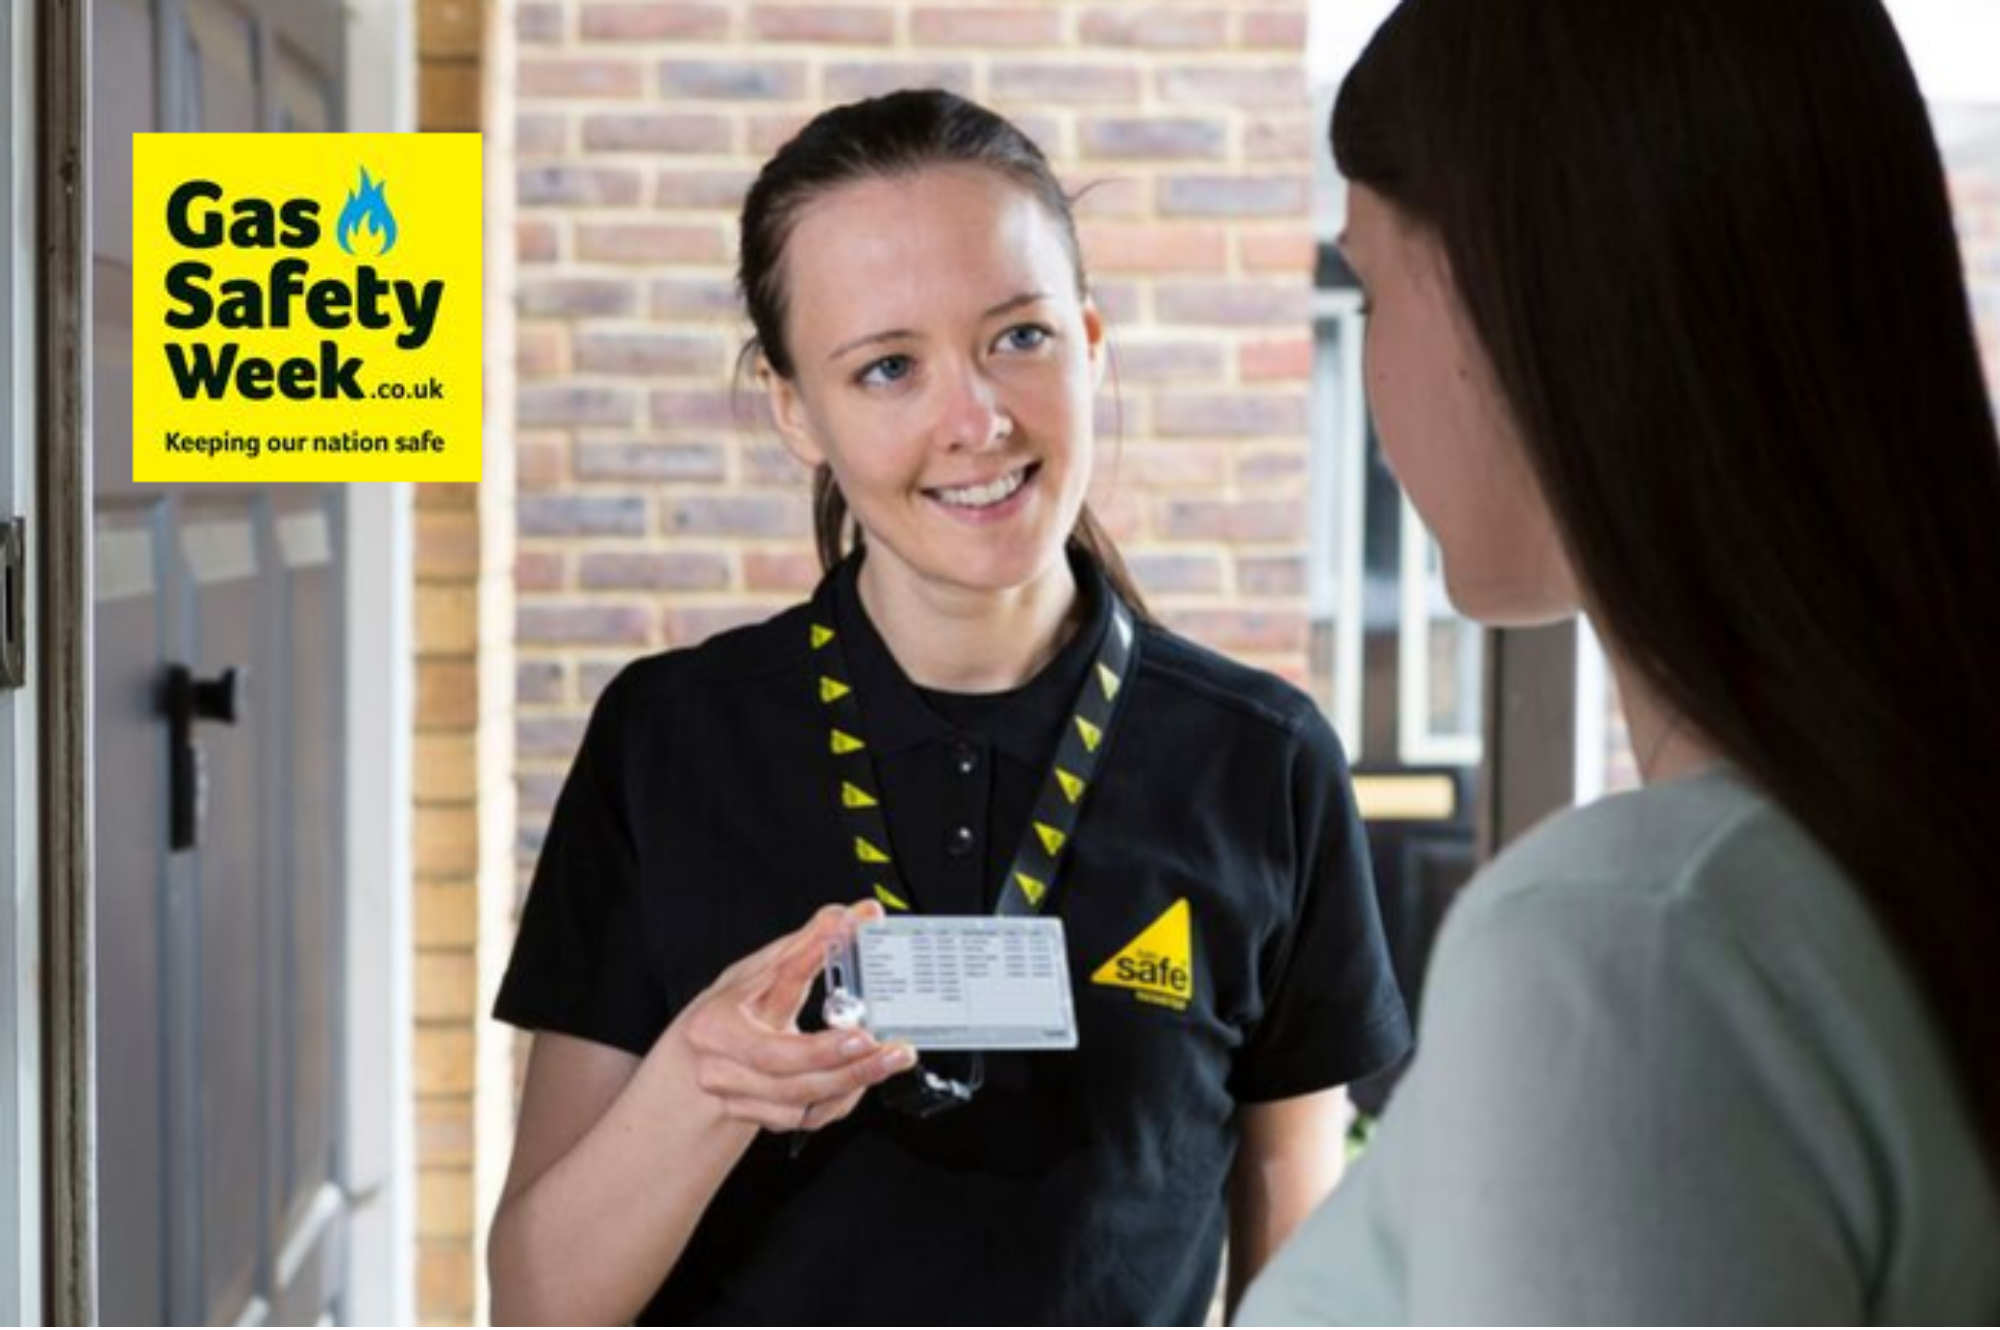 JTL is supporting Gas Safety Week 2019